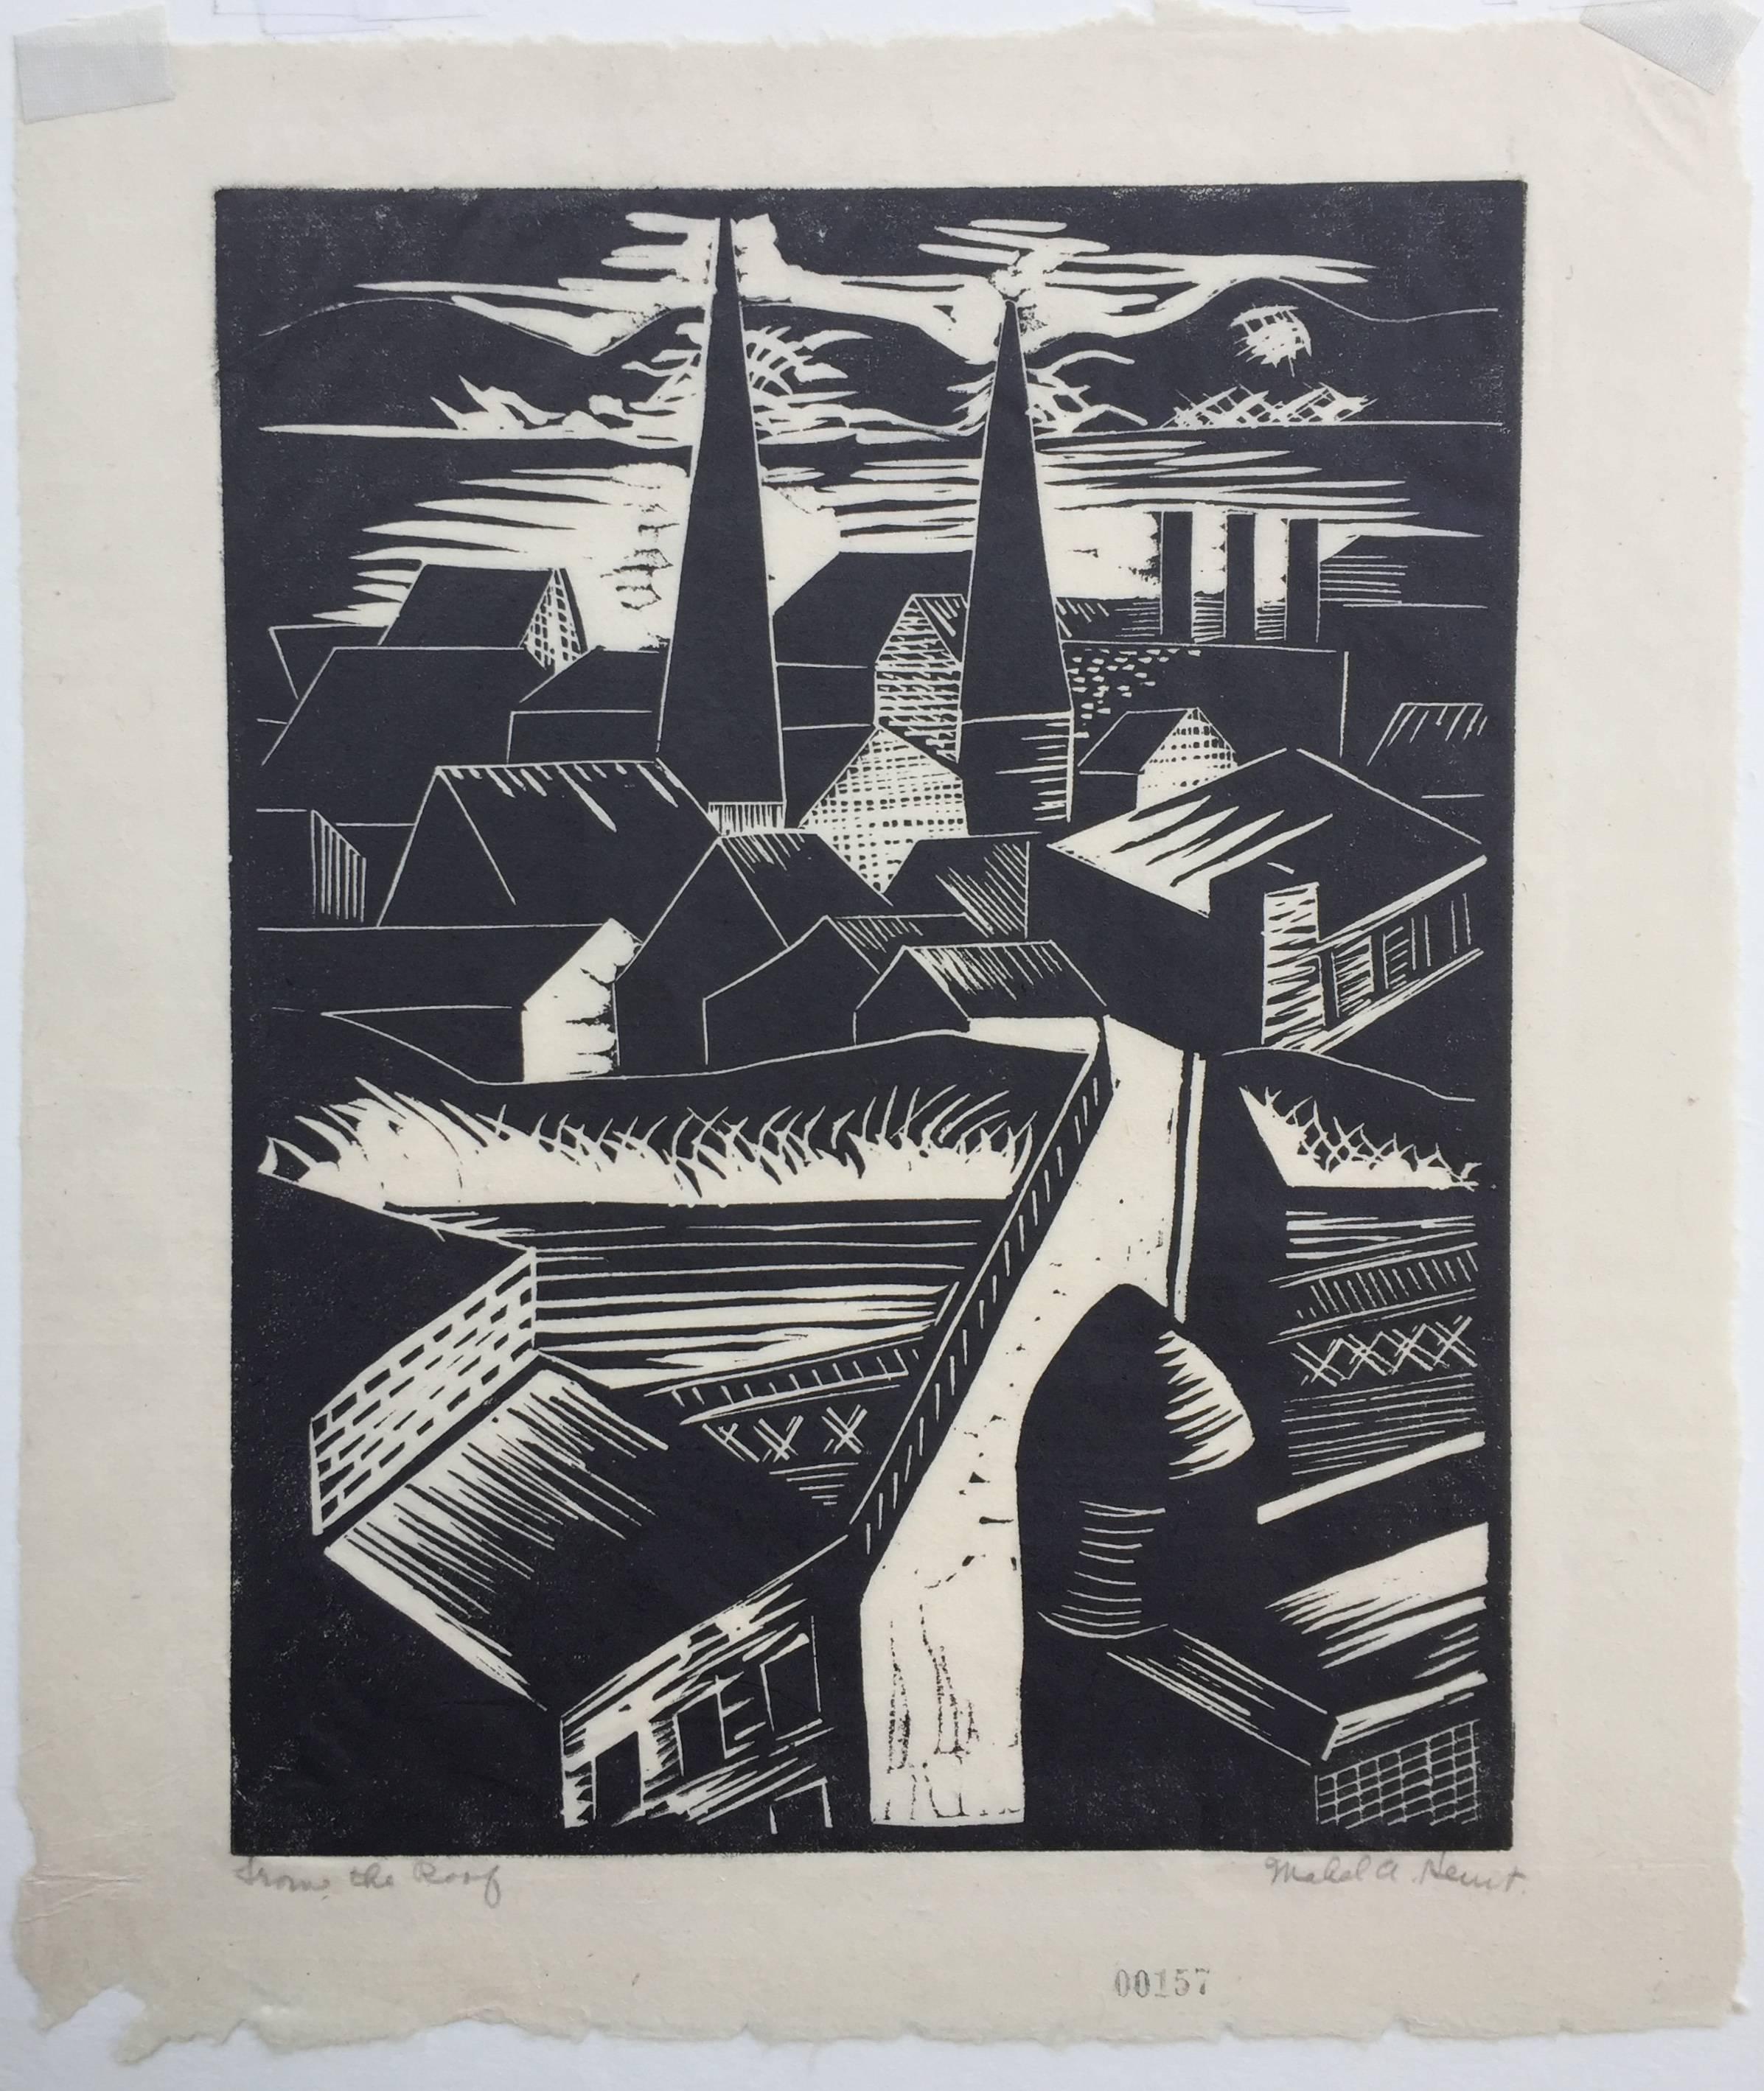 FROM THE ROOF - Print by Mable A. Hewit